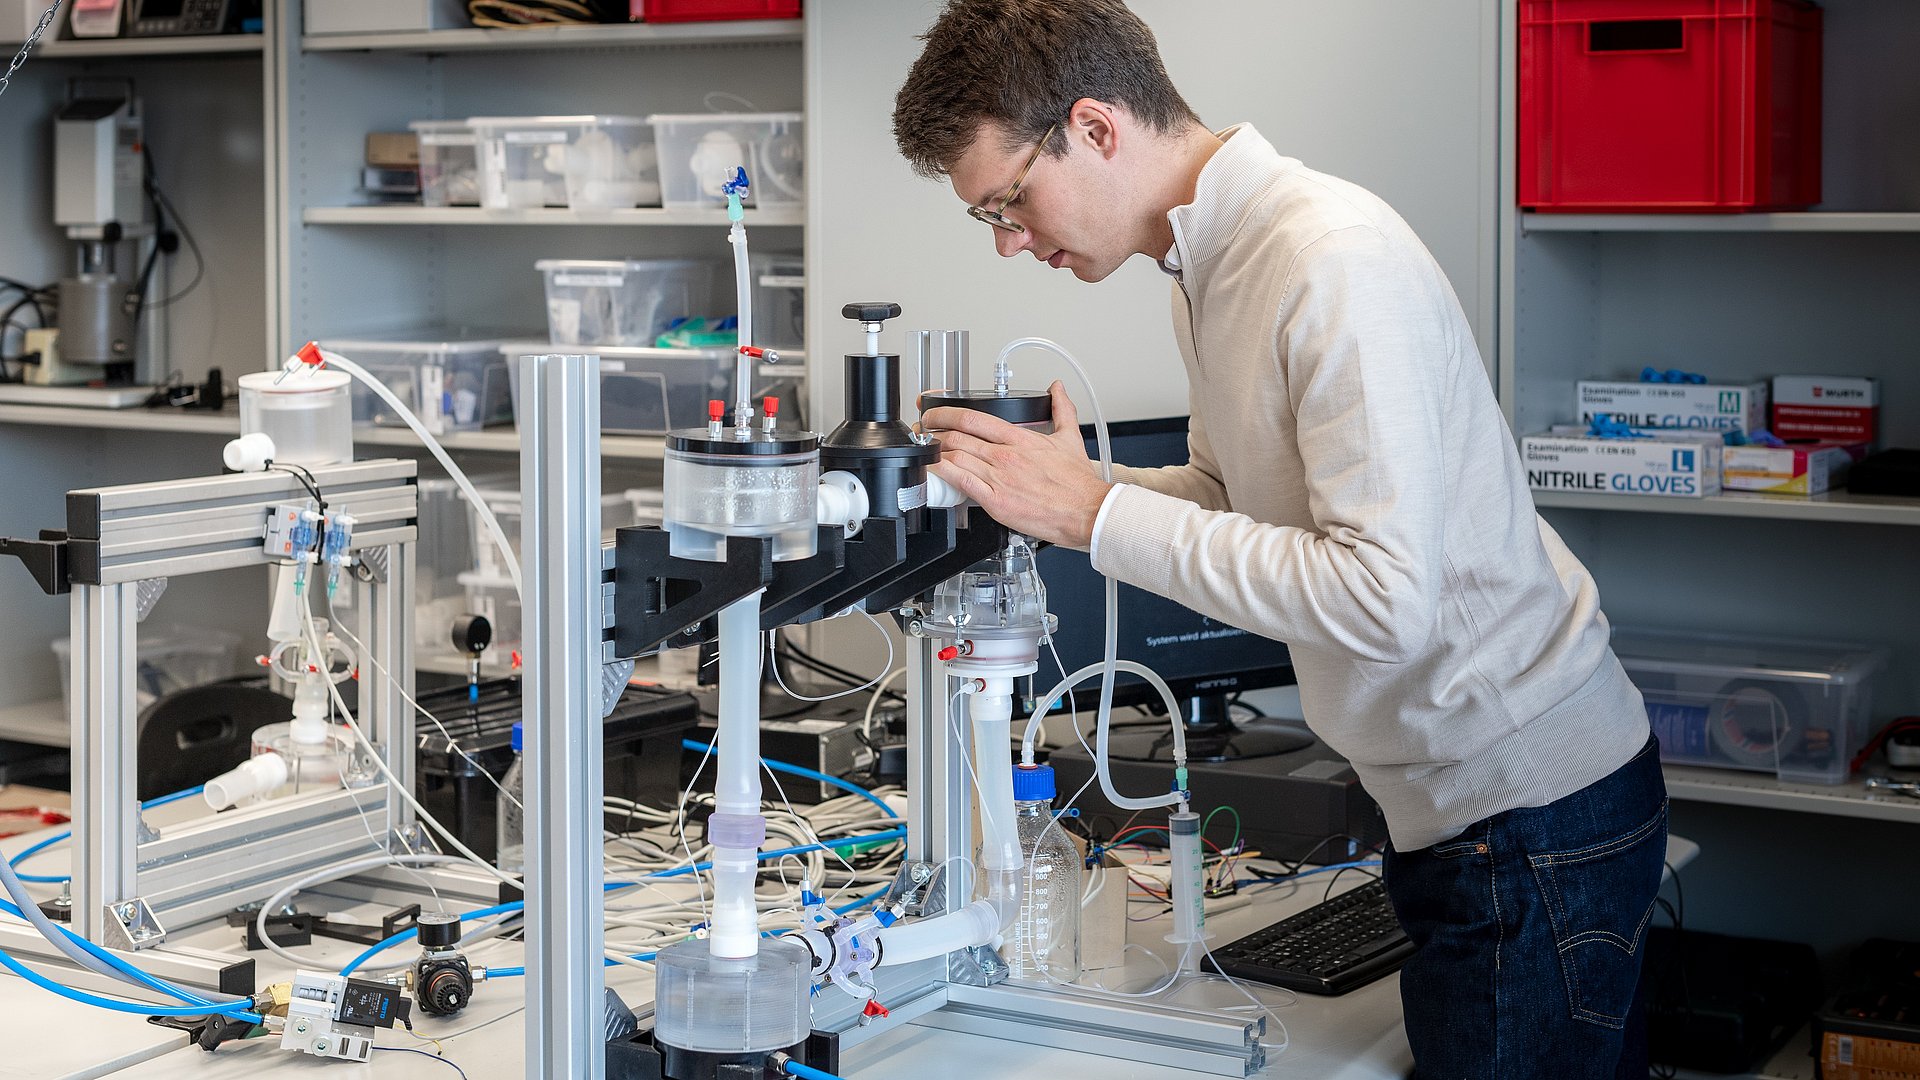 Kilian Mueller, a doctoral candidate at the TUM School of Engineering and Design, tests the functionality of a 3D printed heart valve in a mock-up blood circulation system.